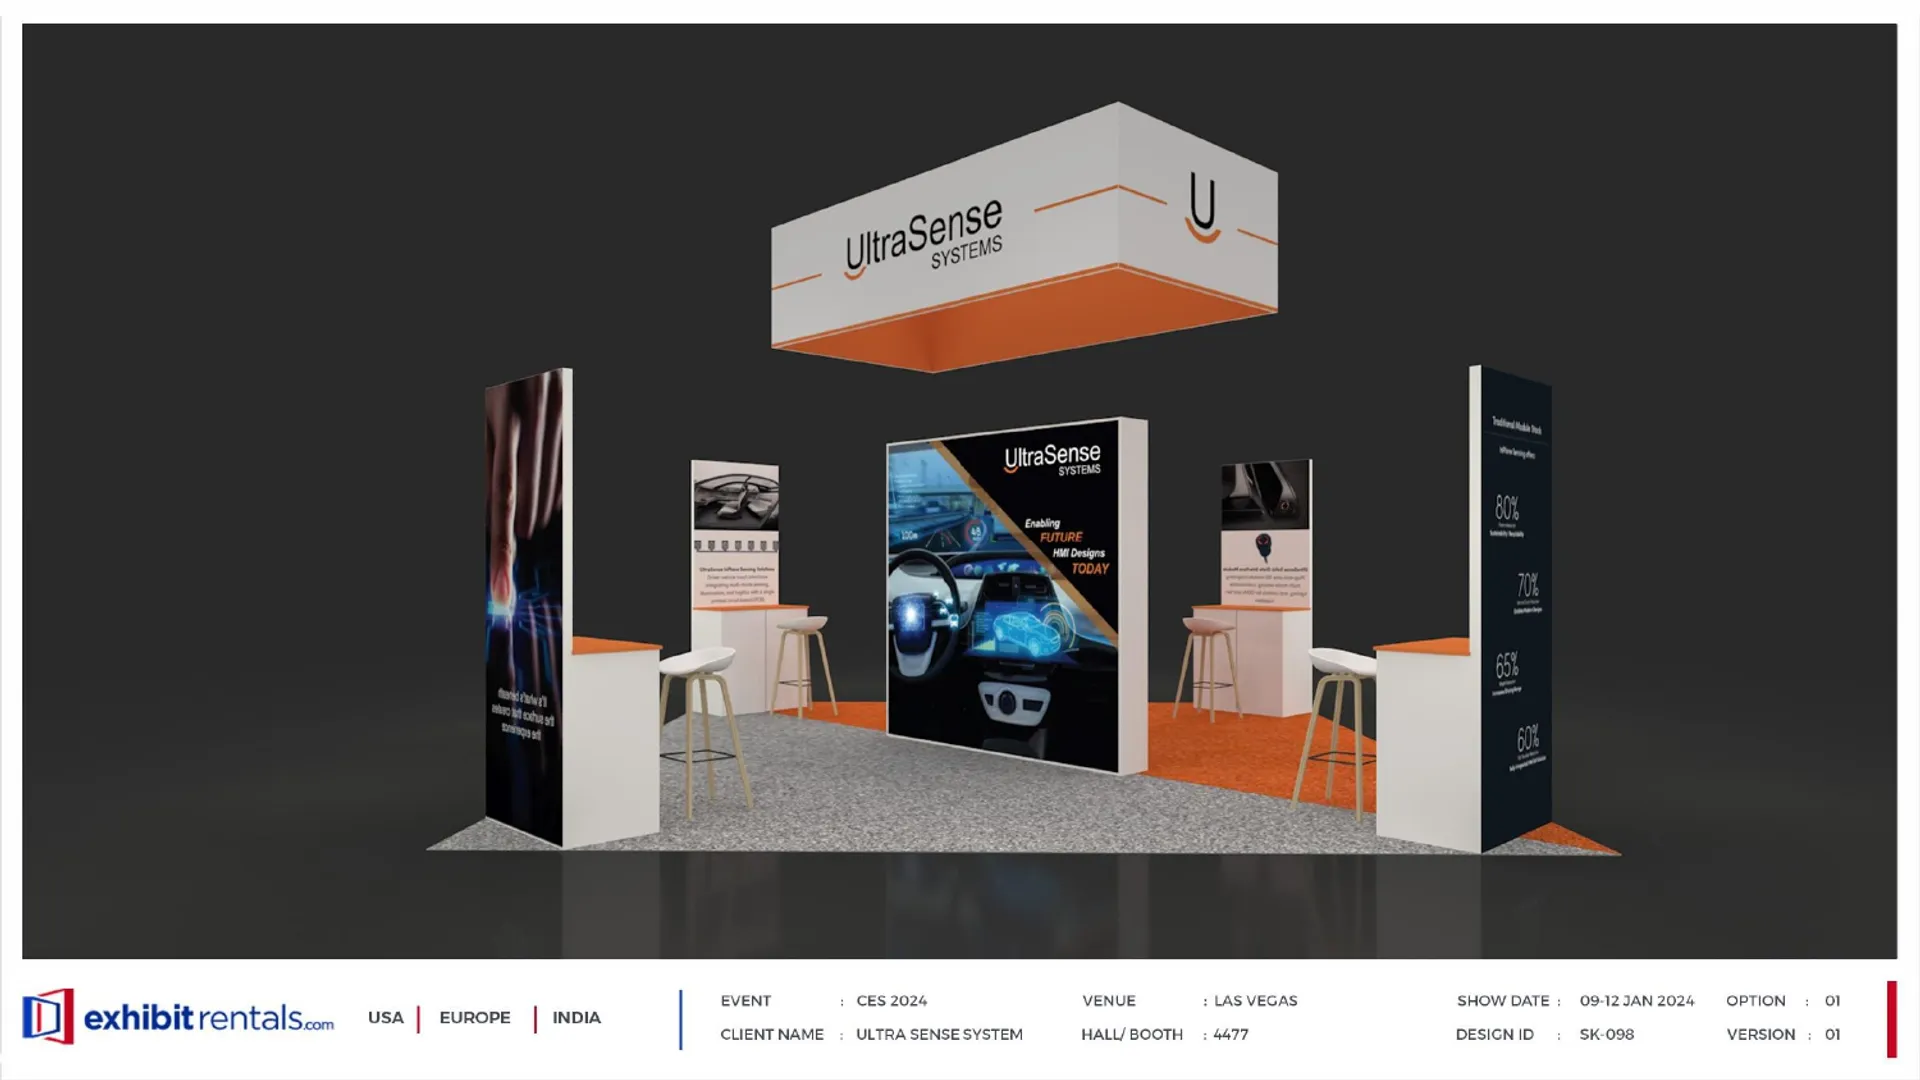 booth-design-projects/Exhibit-Rentals/2024-04-18-20x20-ISLAND-Project-108/1.1 - UltraSense System - ER Design Presentation.pptx-13_page-0001-mkptcs.jpg